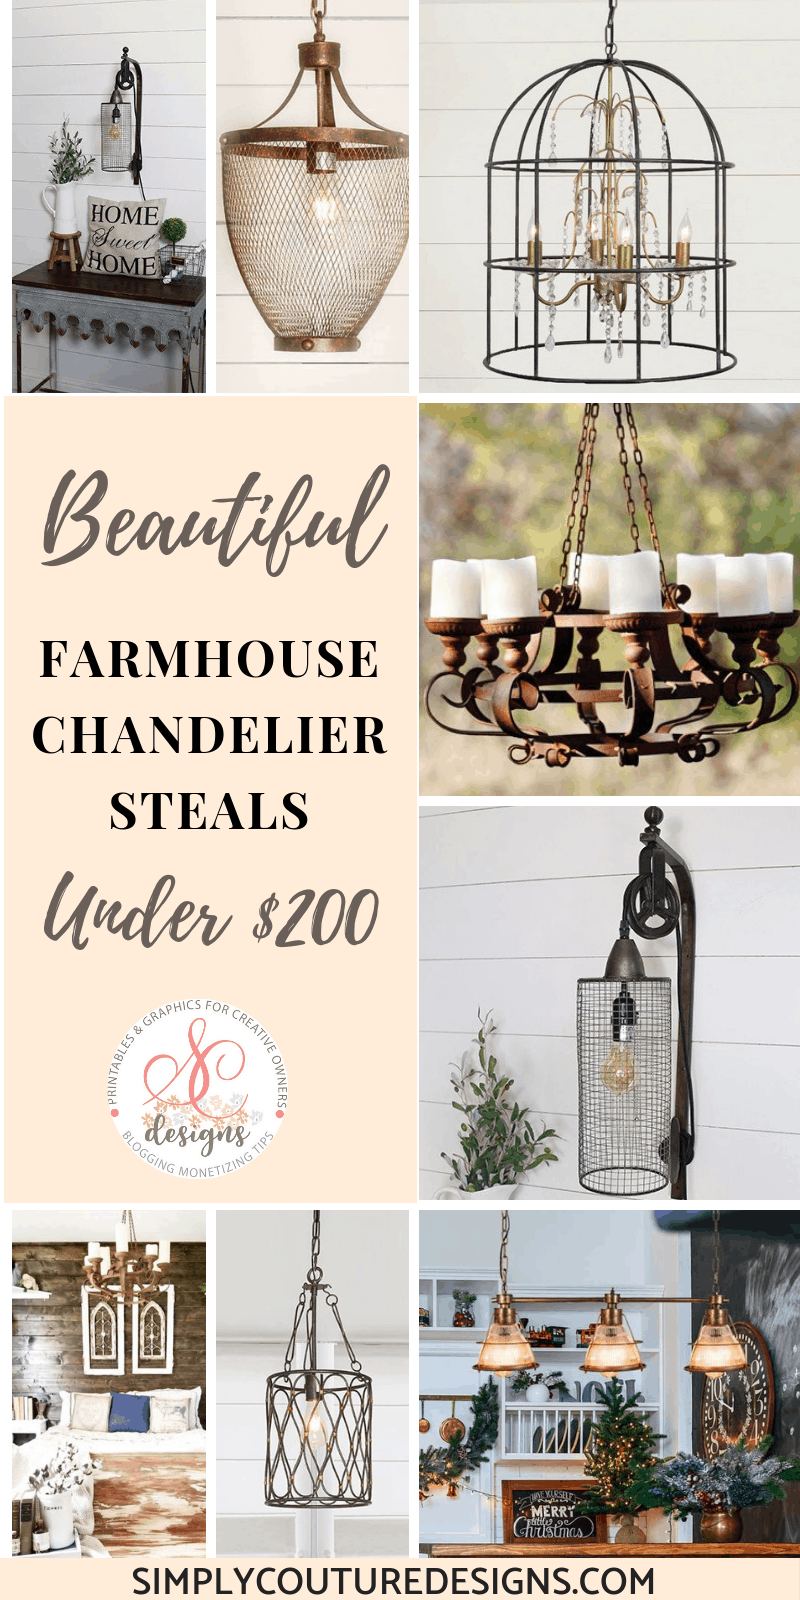 Beautiful Farmhouse chandelier steals under $200. Who doesn't love farmhouse chandeliers, especially at an affordable price!? Check out these gorgeous farmhouse light fixture chandeliers in such great price before they get sold out.